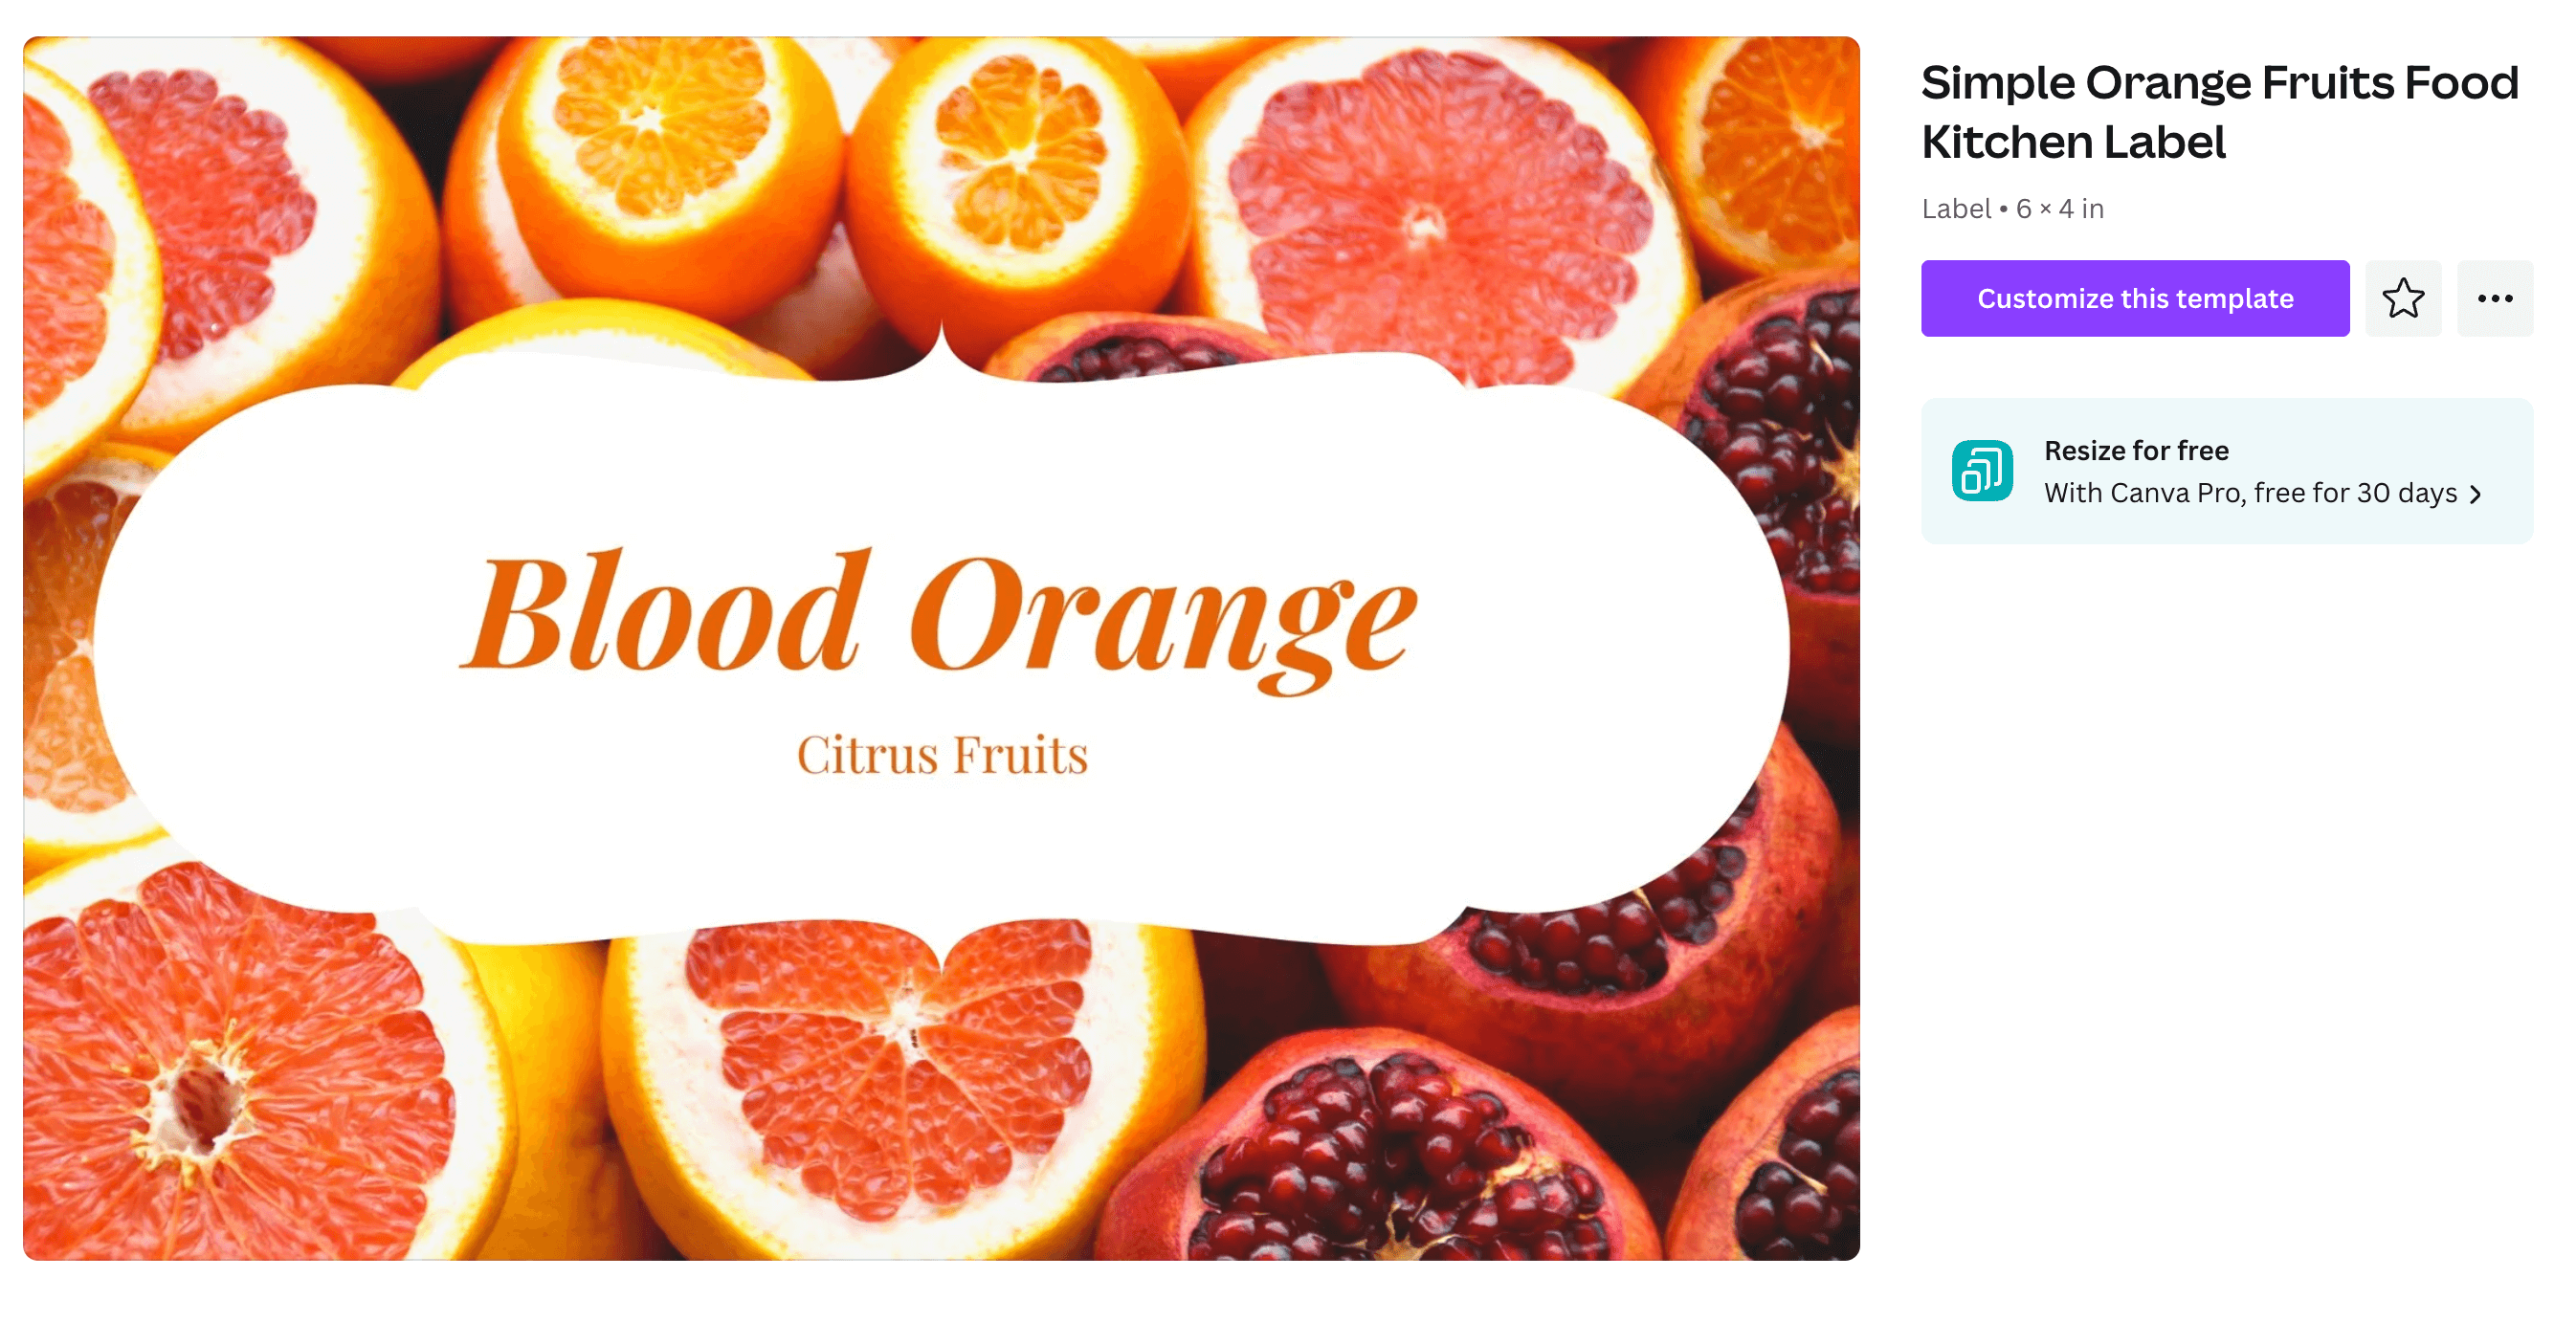 A label with text that reads "Blood Orange Citrus Fruits" over a photo of various citrus fruits.